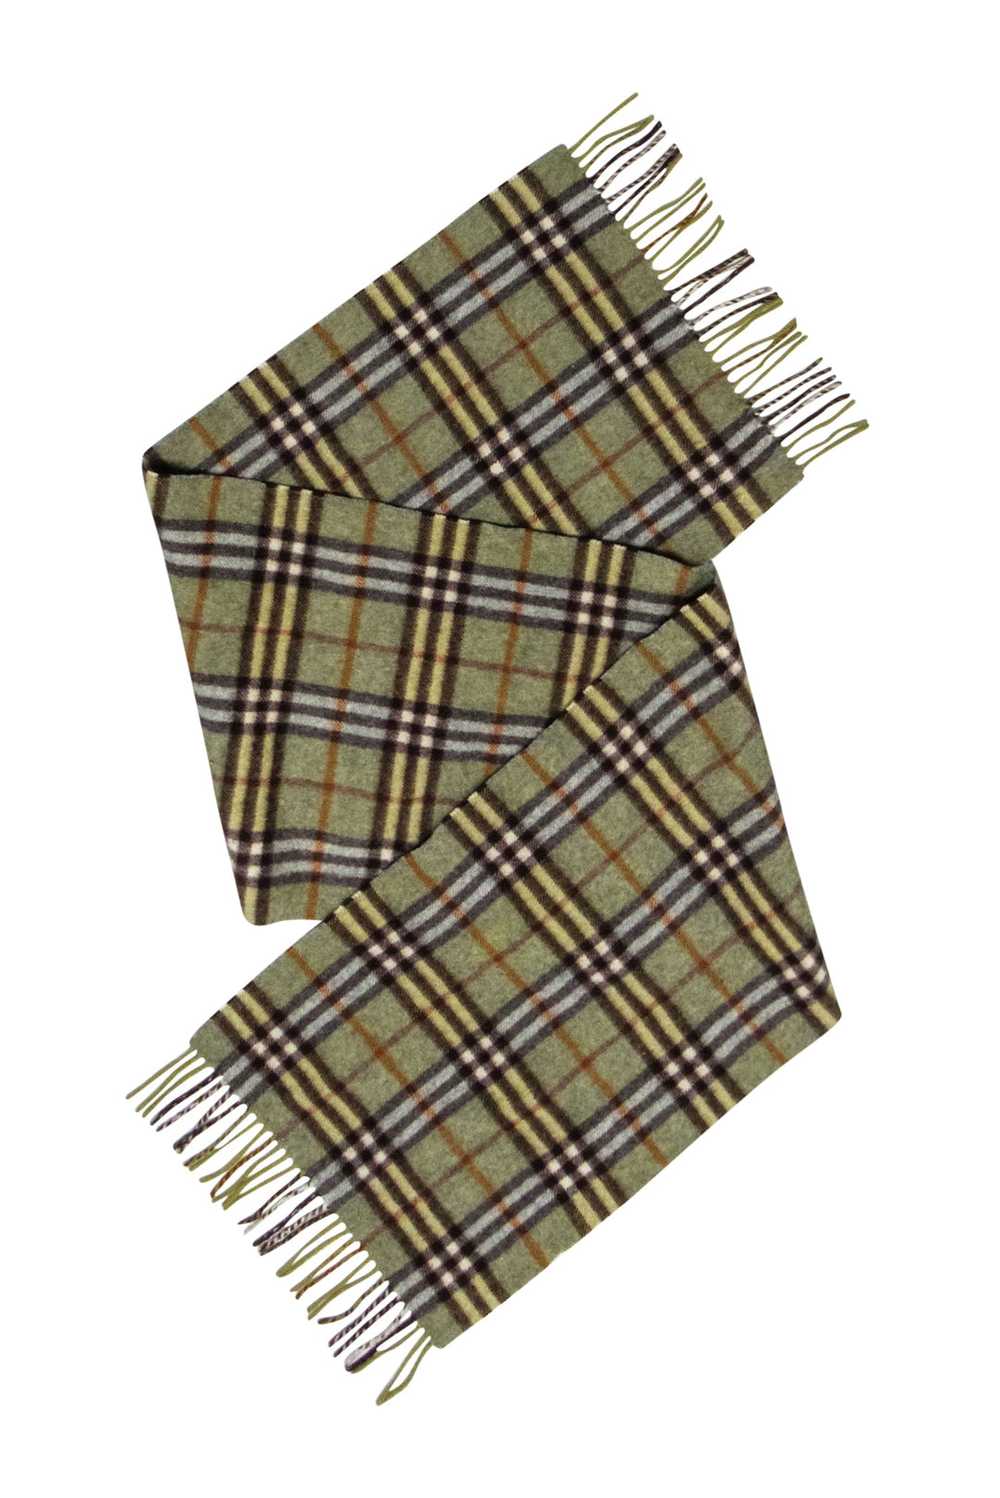 Burberry - Green & Brown Plaid Cashmere Scarf - image 2